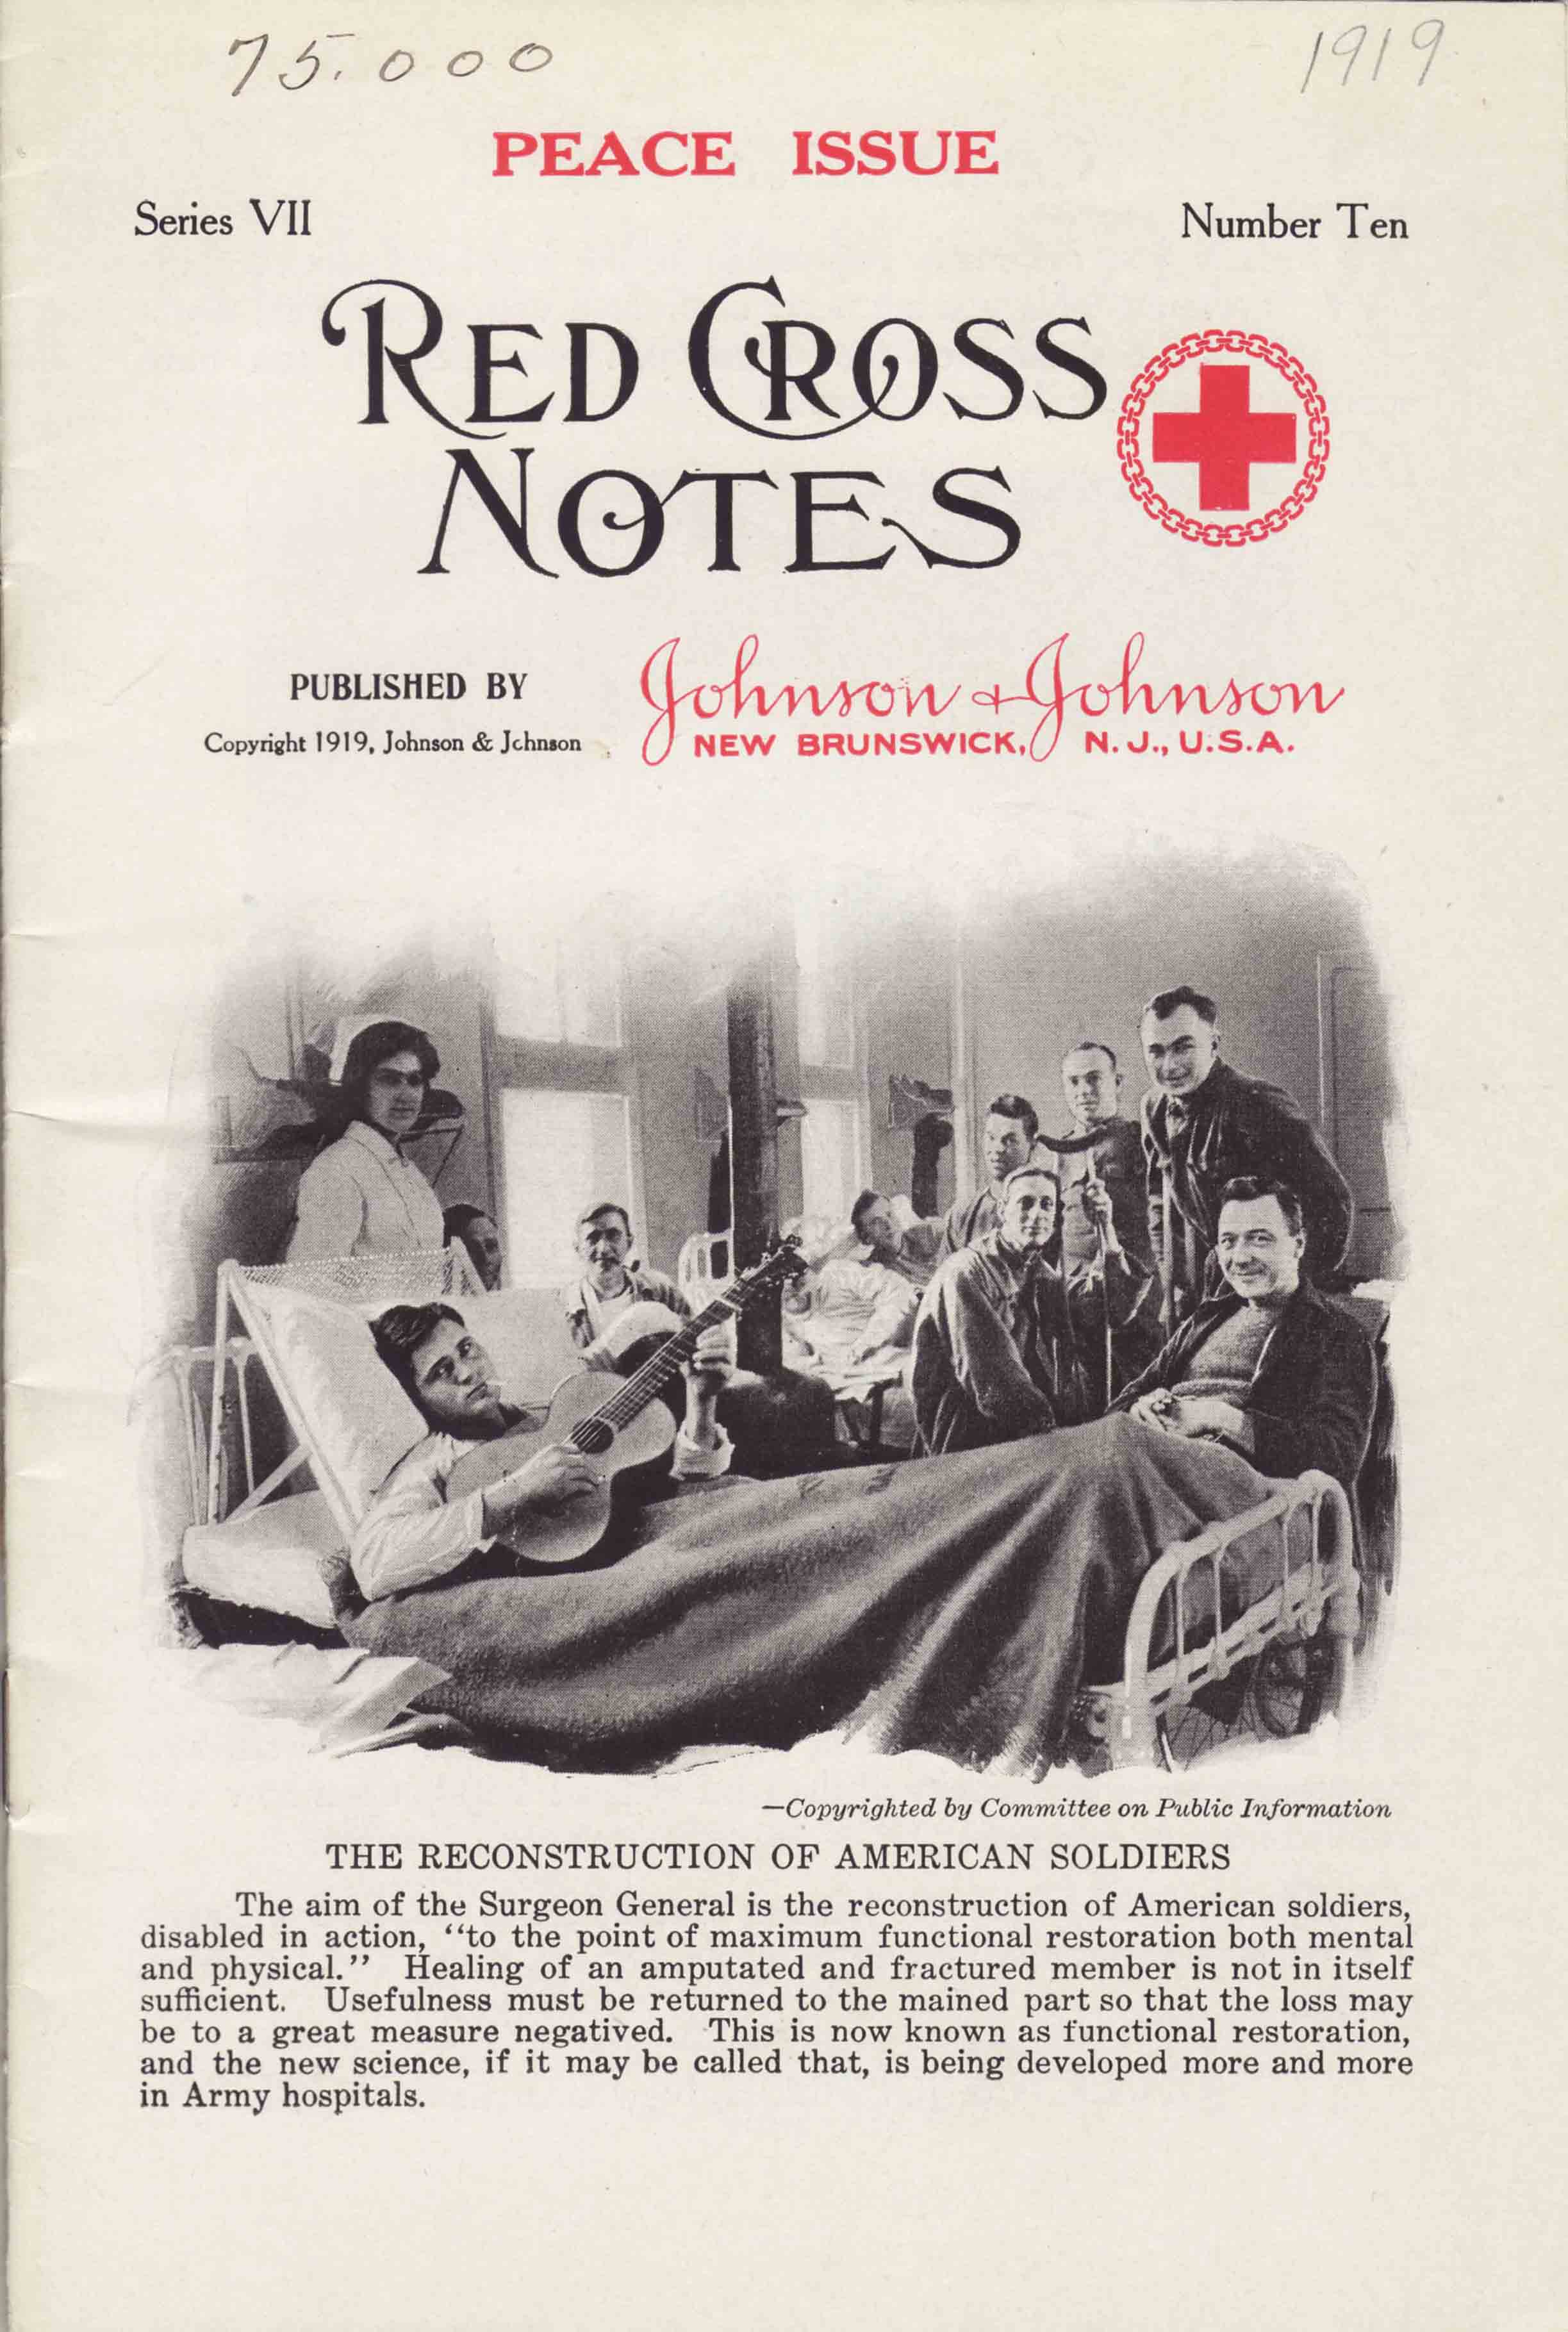 Red Cross Notes Peace Issue, 1919, focusing on the rehabilitation of returning veterans.  Image courtesy: Johnson & Johnson Archives.